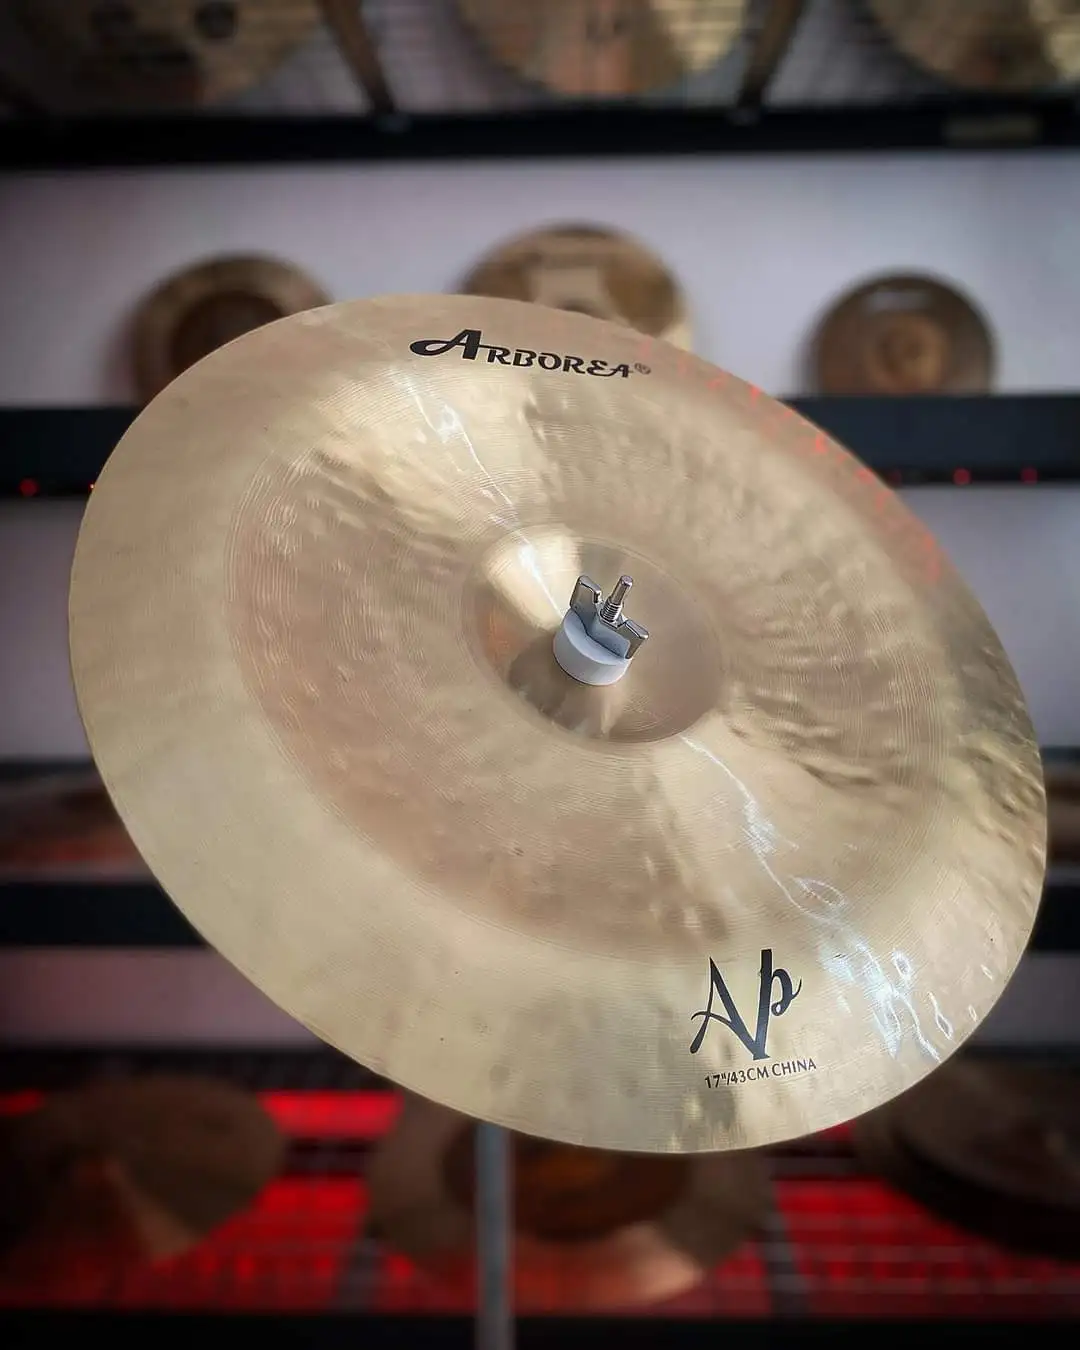 

Arborea Professional Cymbal-AP Series China Cymbal 14-19 inch Bronze Handmade Cymbal Effects Drum Cymbals Best Gifts